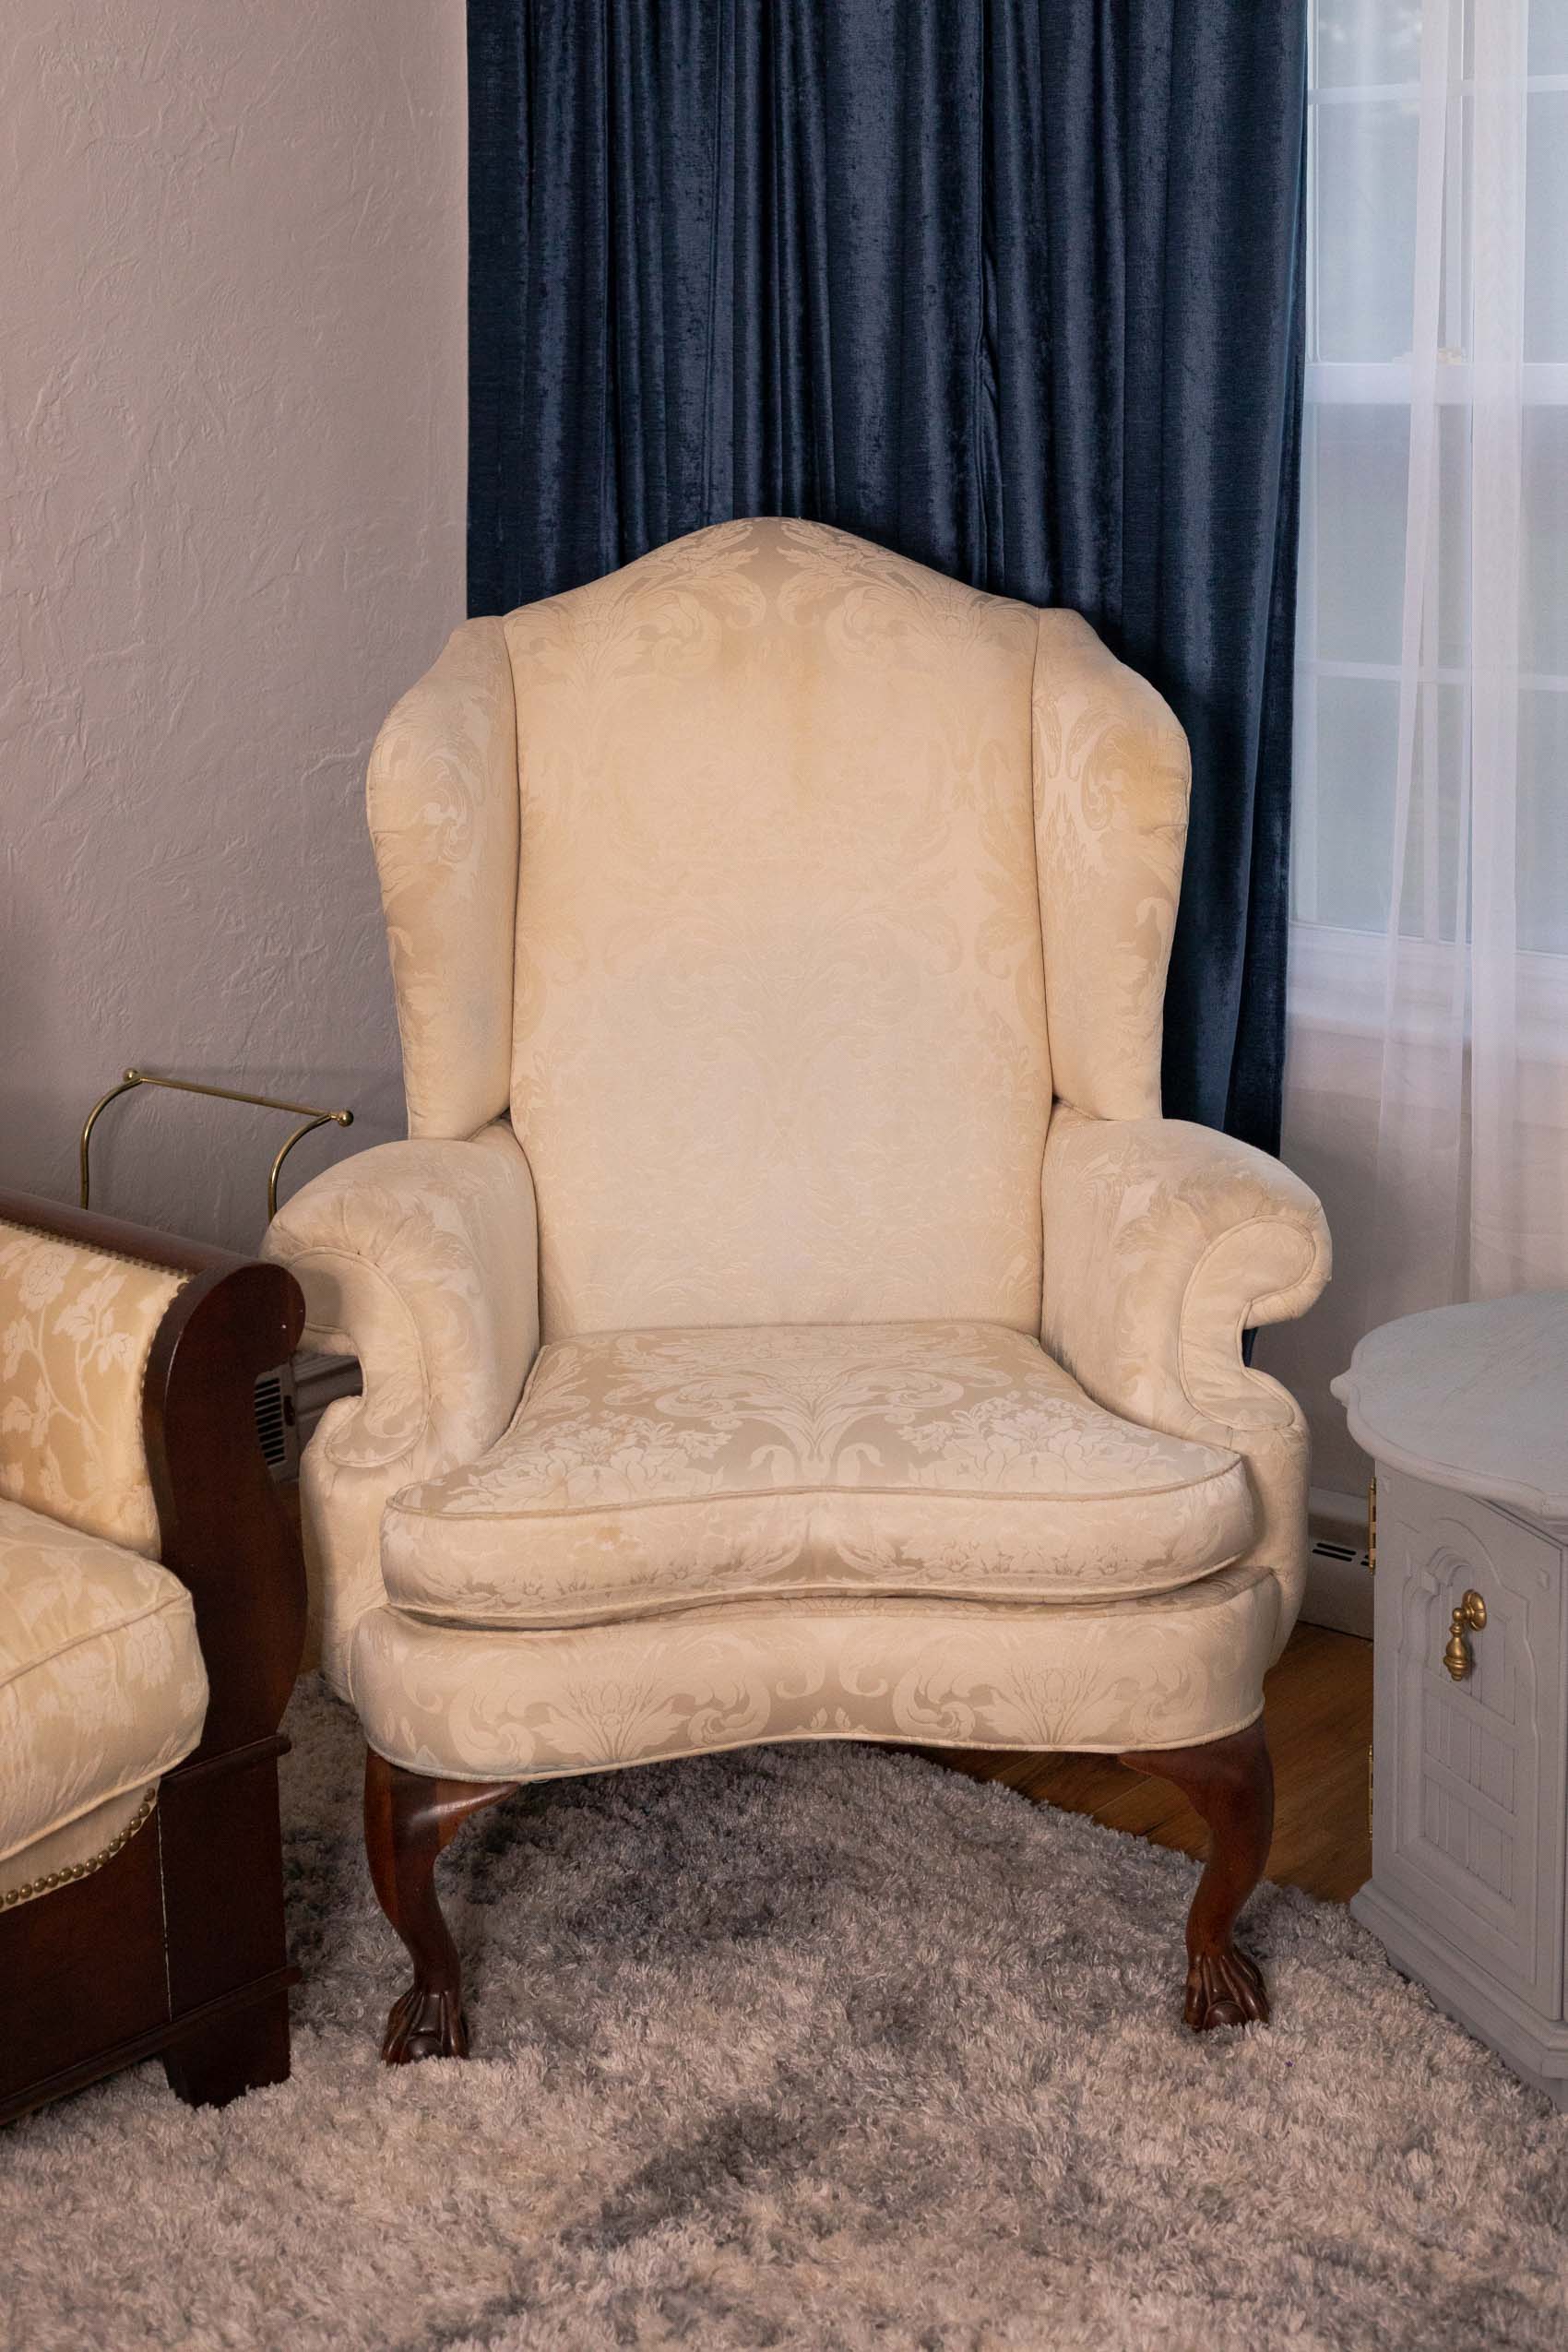 Rit Dye Before and After: Before Shot of the off white fabric chair I recently dyed